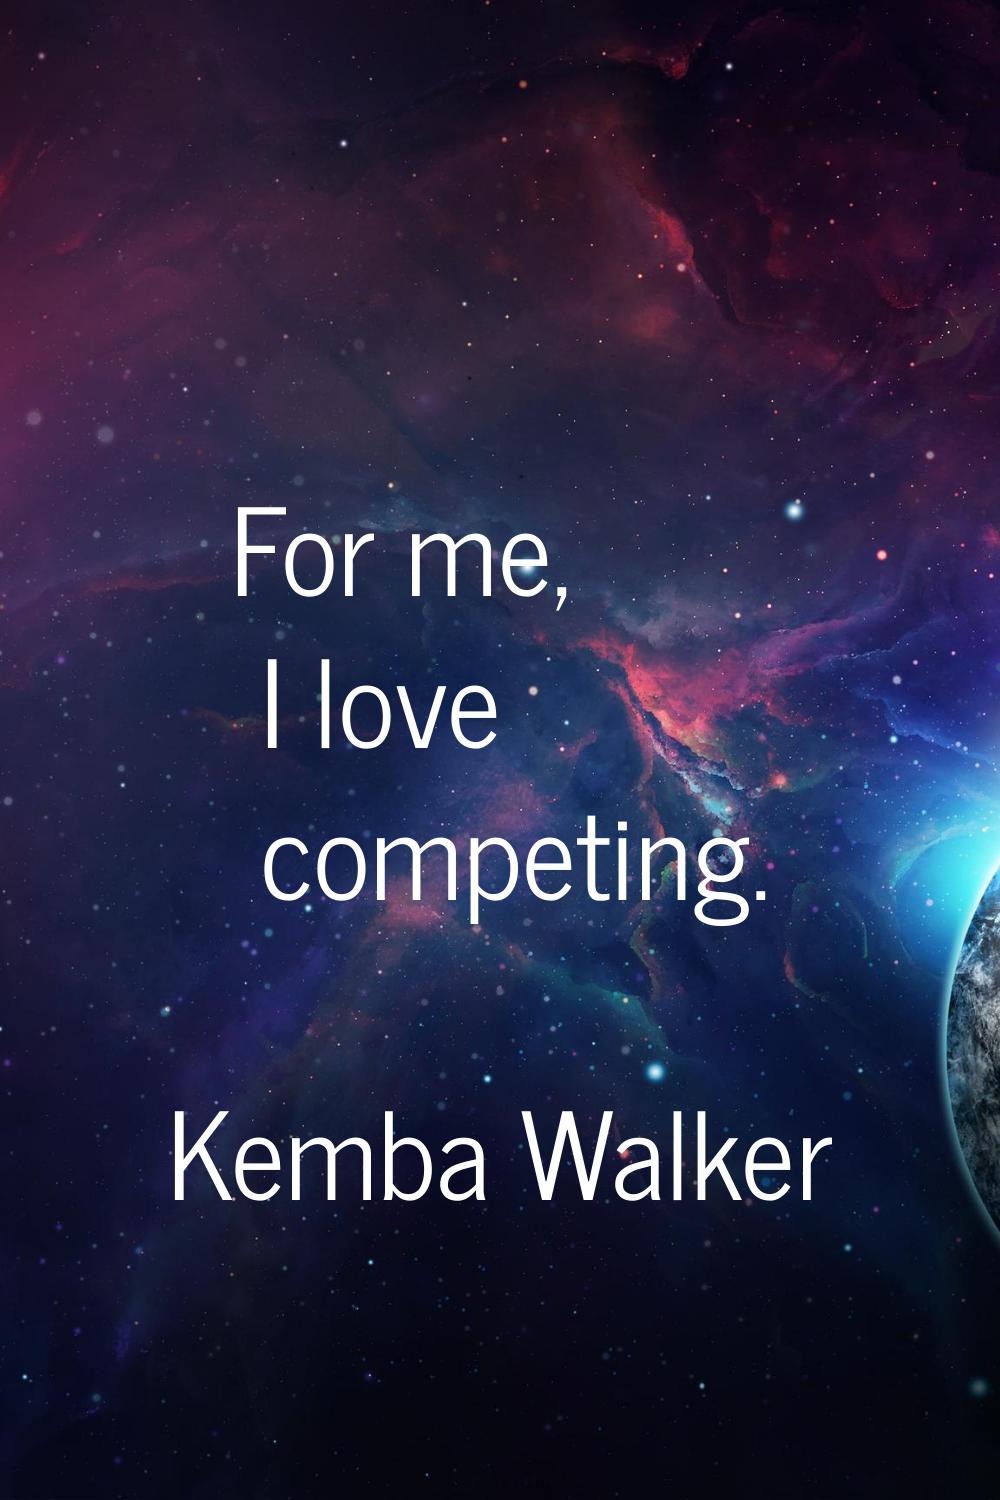 For me, I love competing.